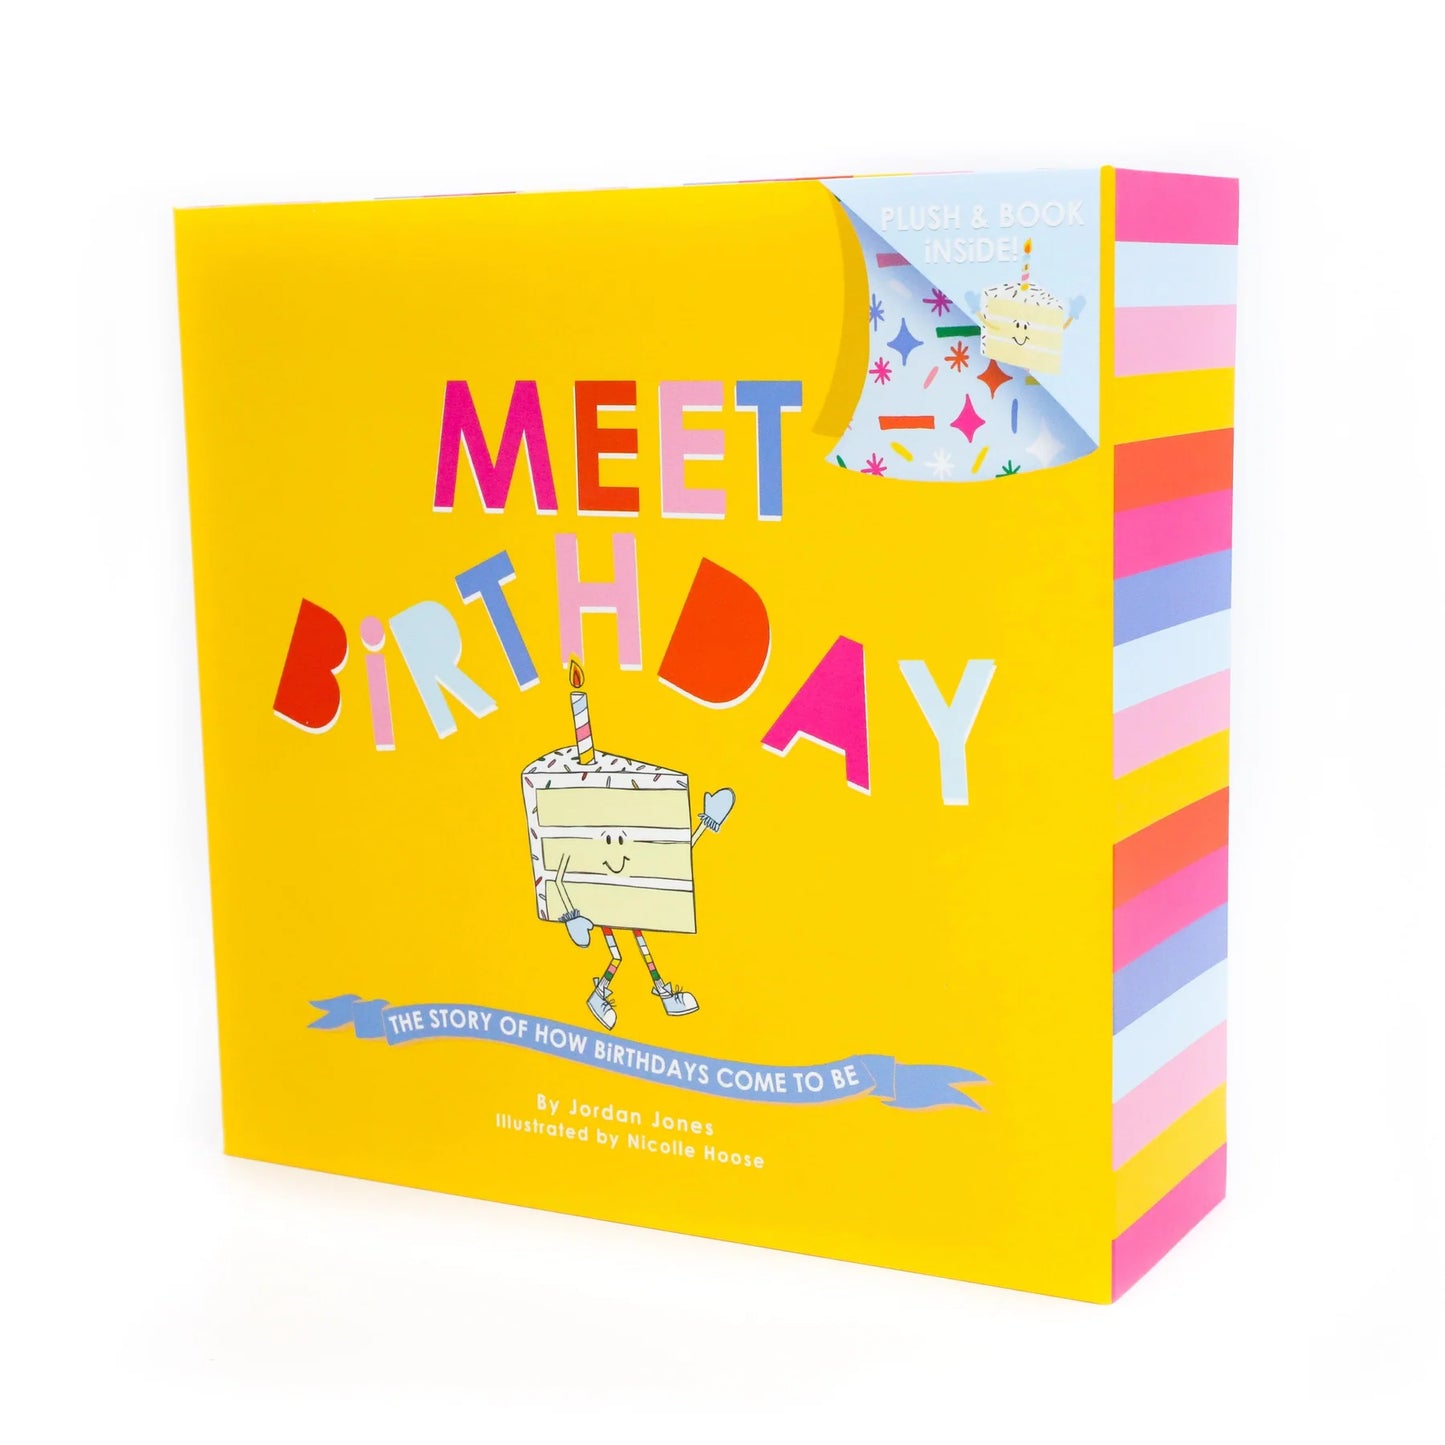 MEET BIRTHDAY - A STORY OF HOW BIRTHDAYS CAME TO BE